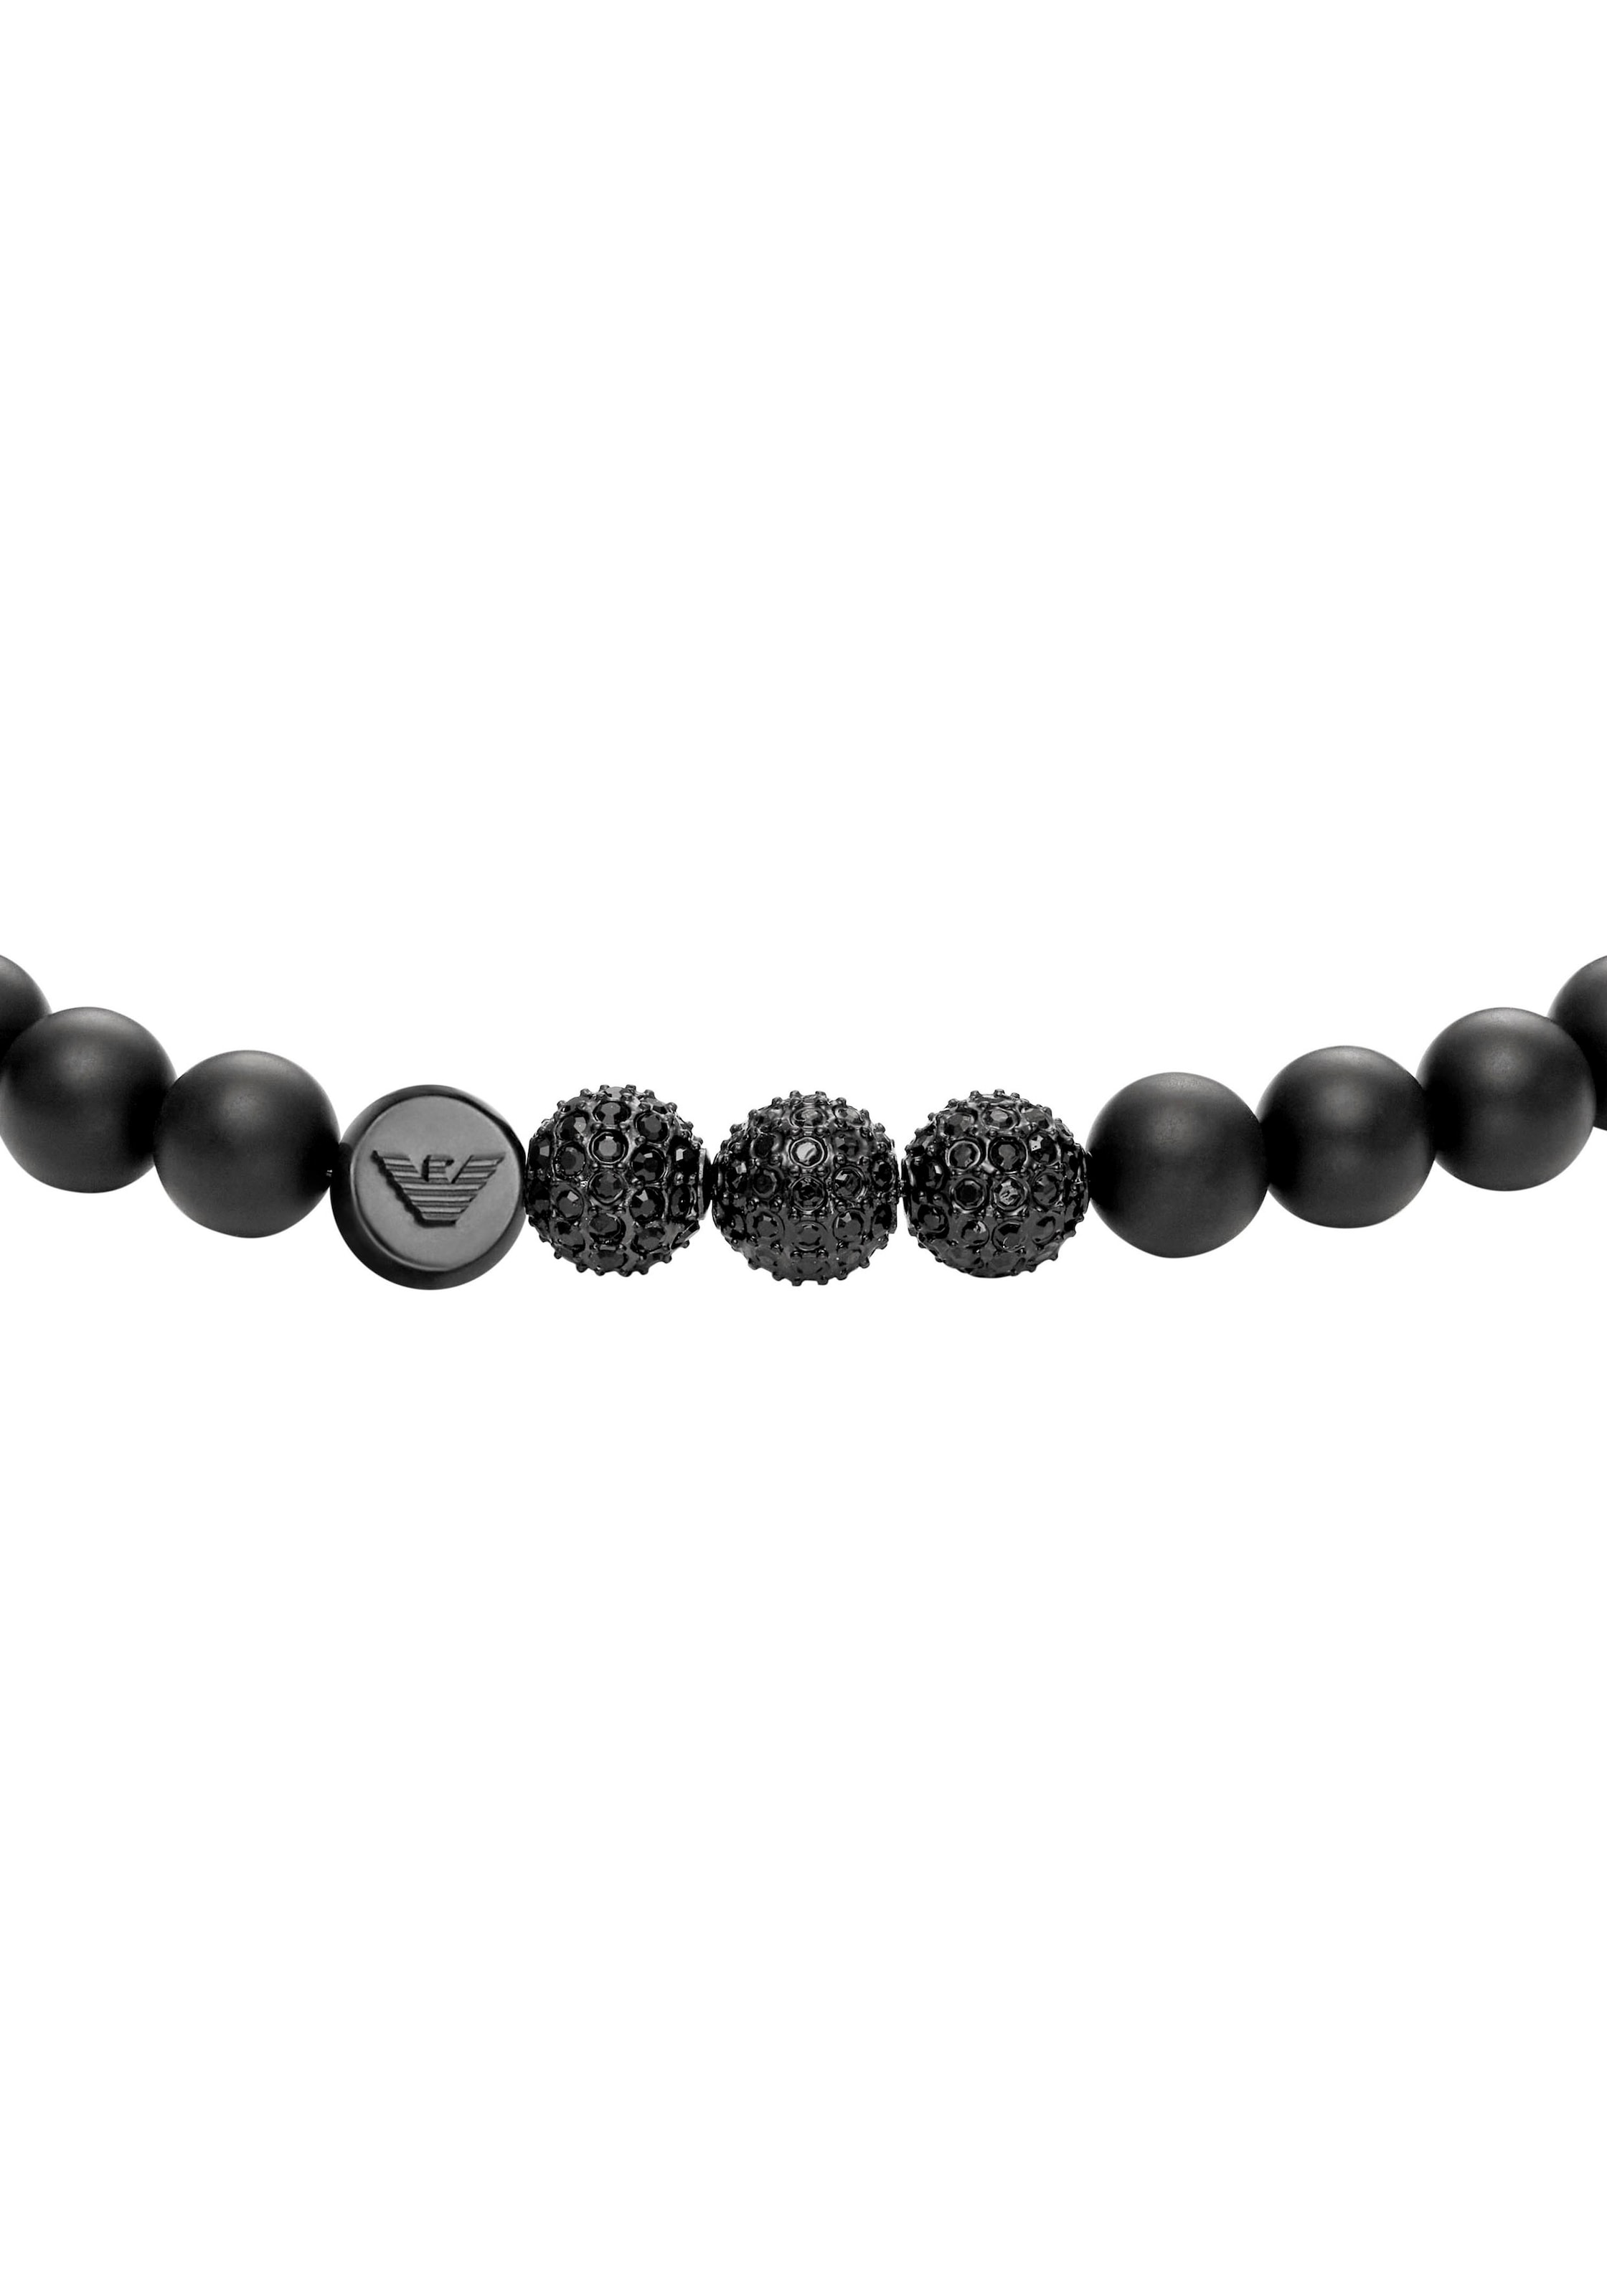 Emporio Armani Armband »ICONIC TREND, BEADS AND PAVE, EGS3030001«, mit Onyx  und Gagat | BAUR